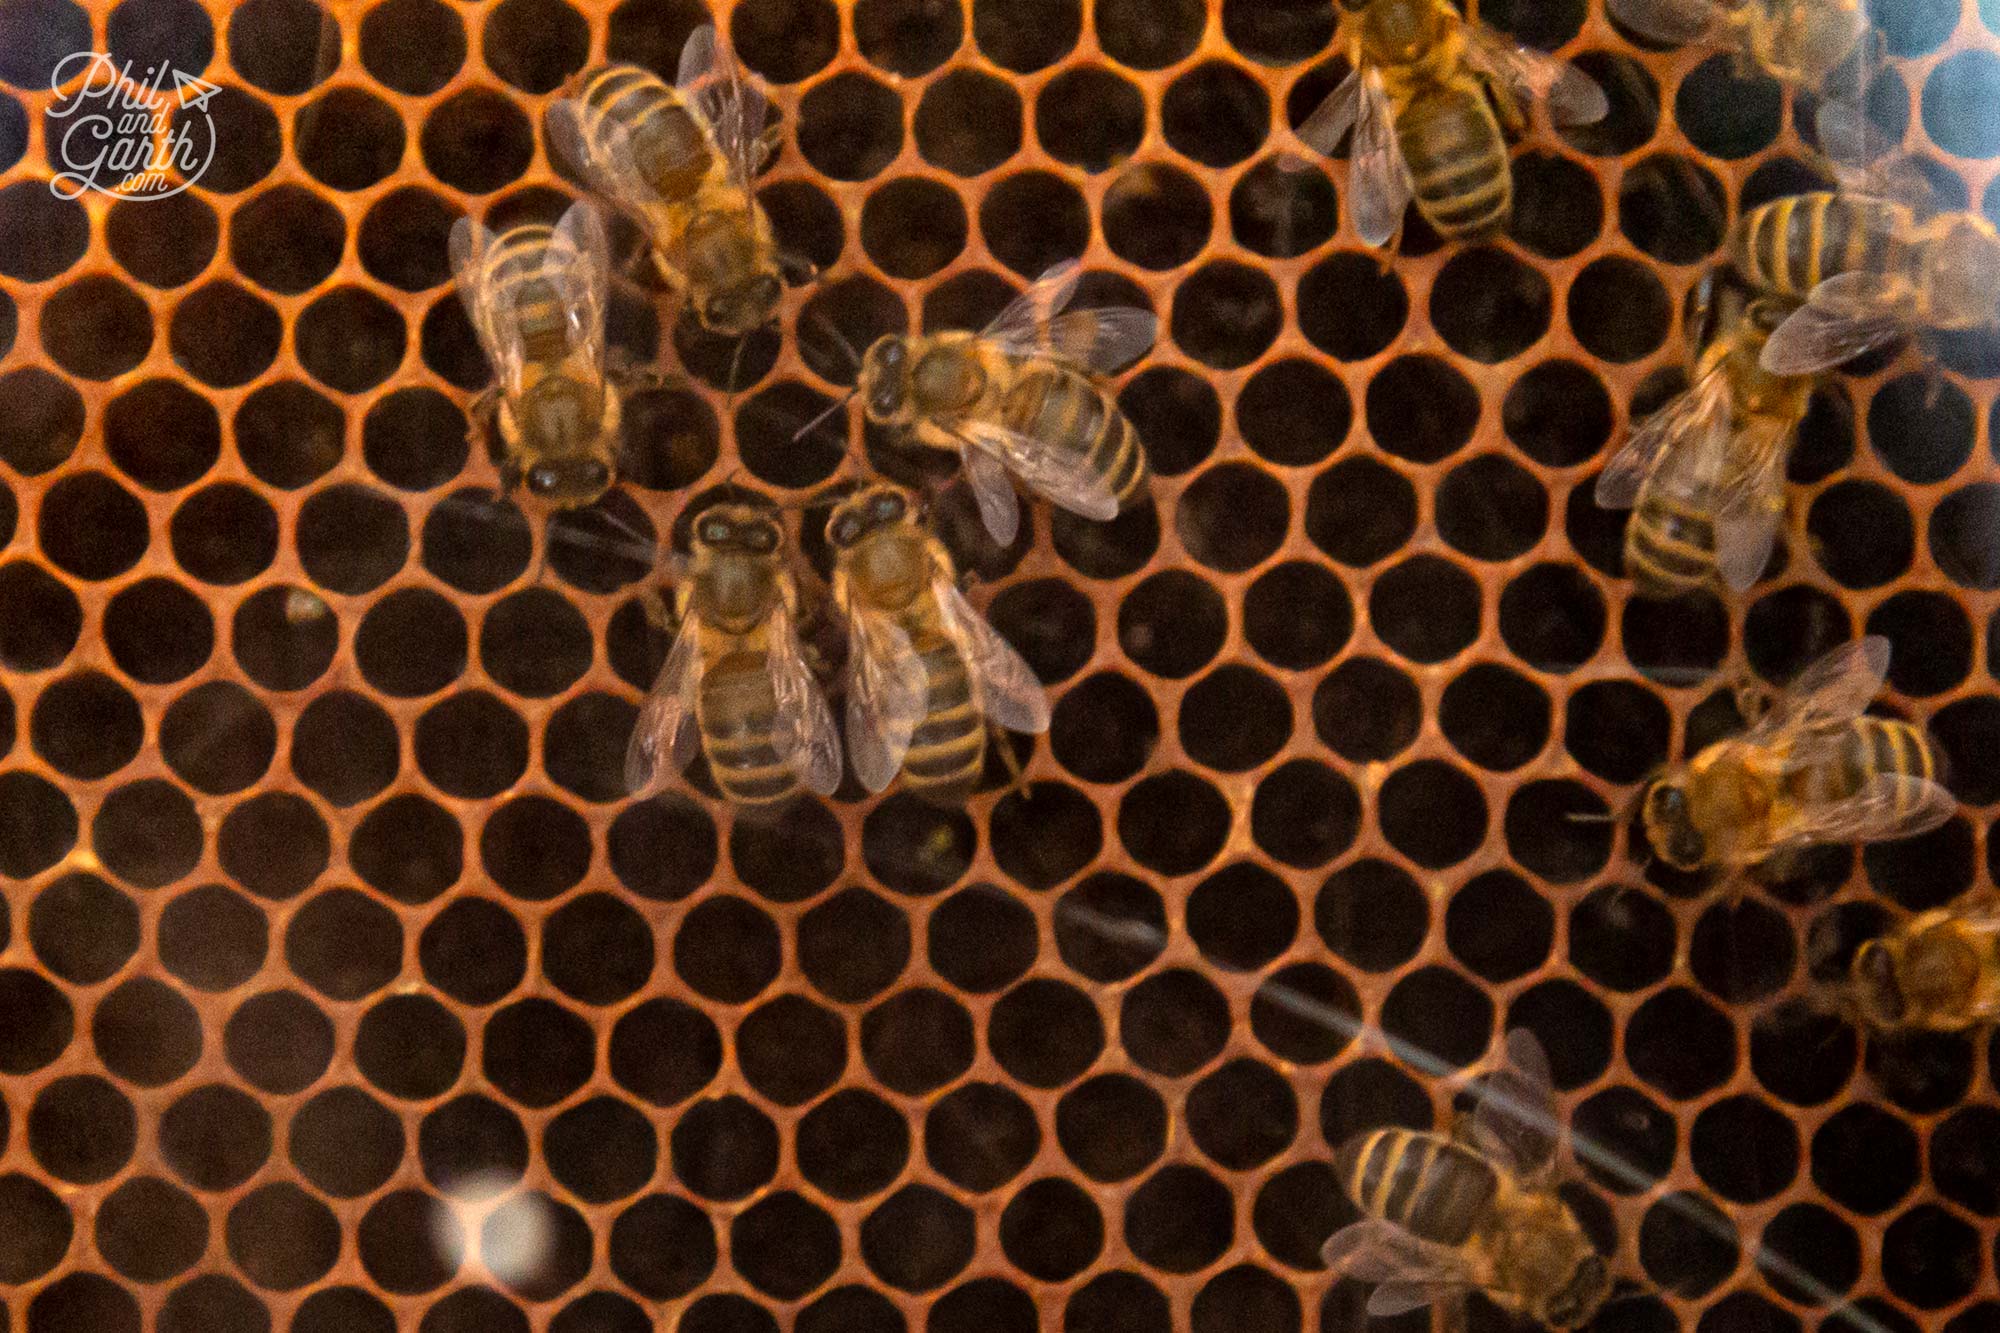 You can view black honey bees at the bee observation hive